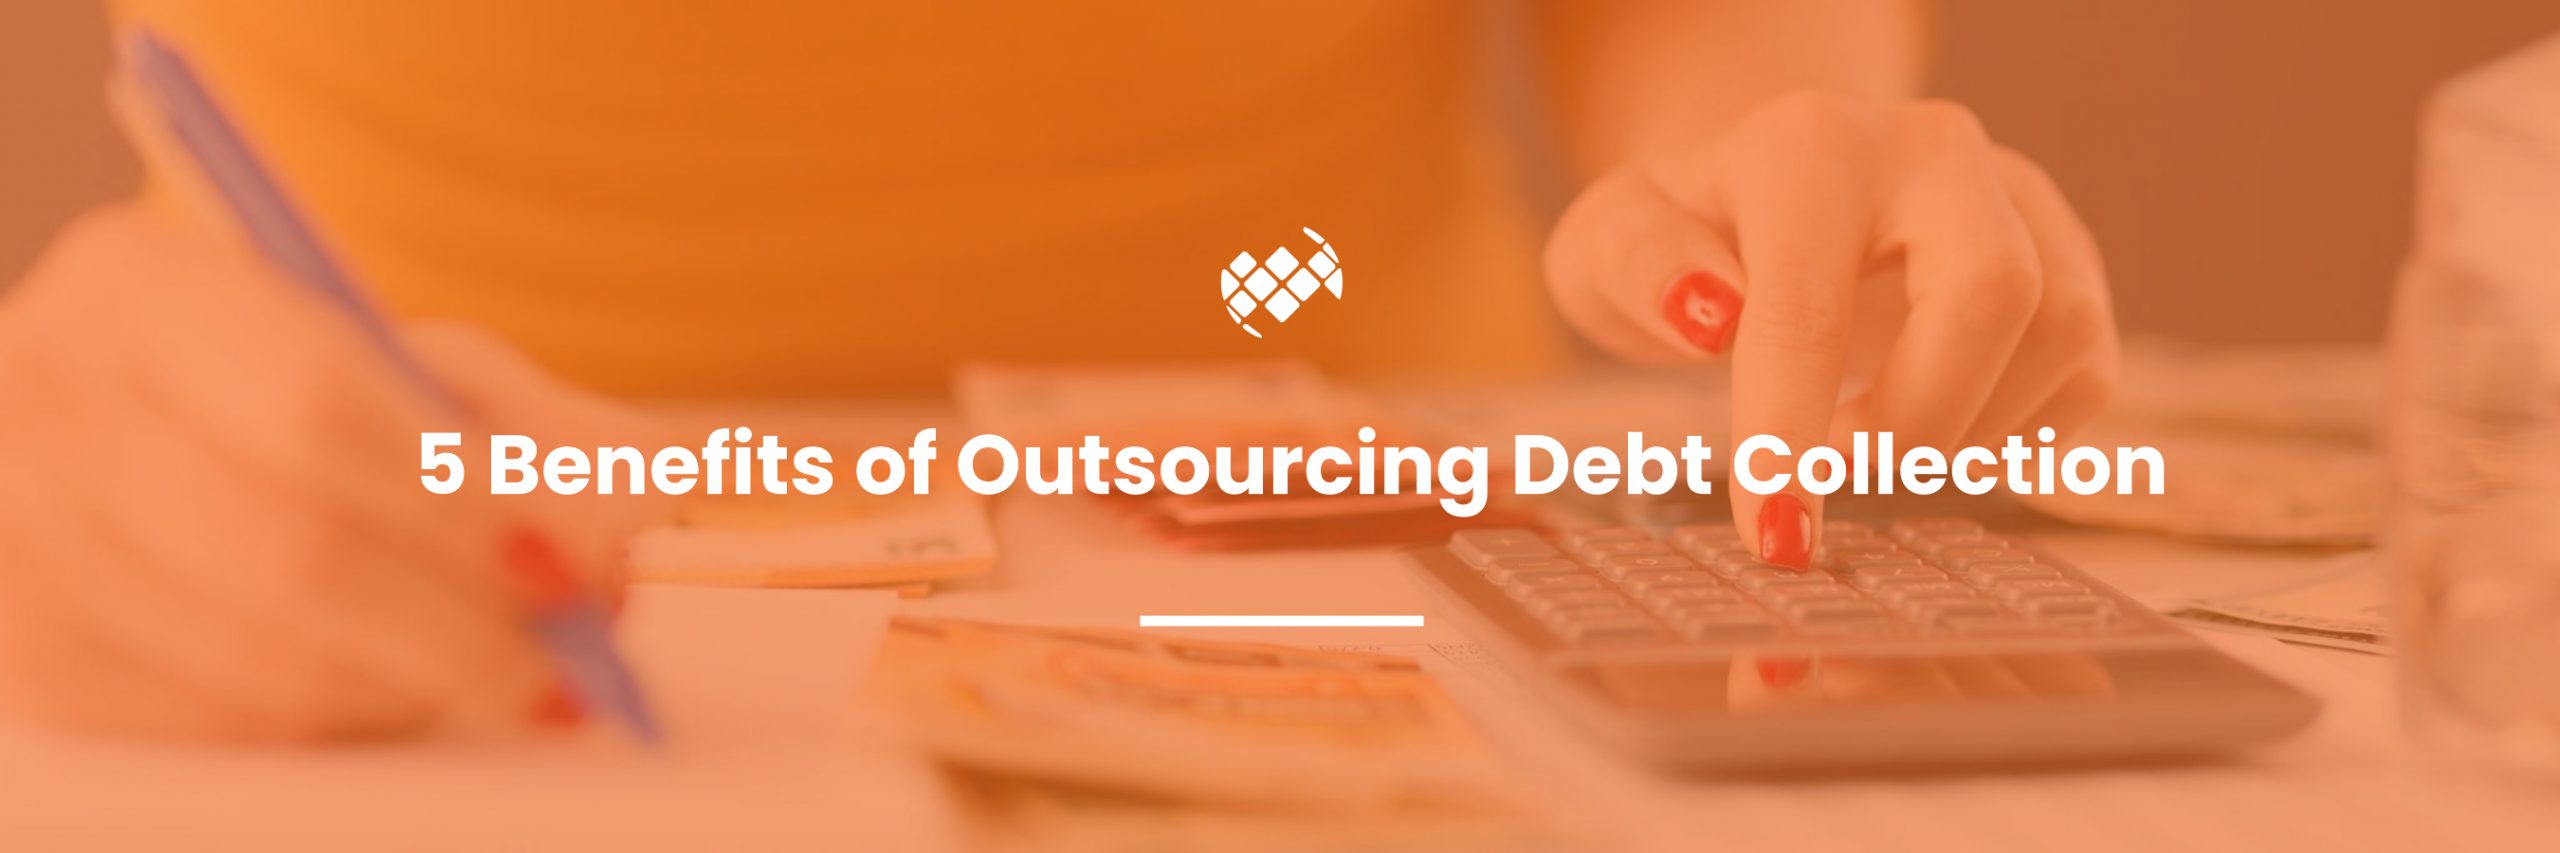 Outsourcing Debt Collection